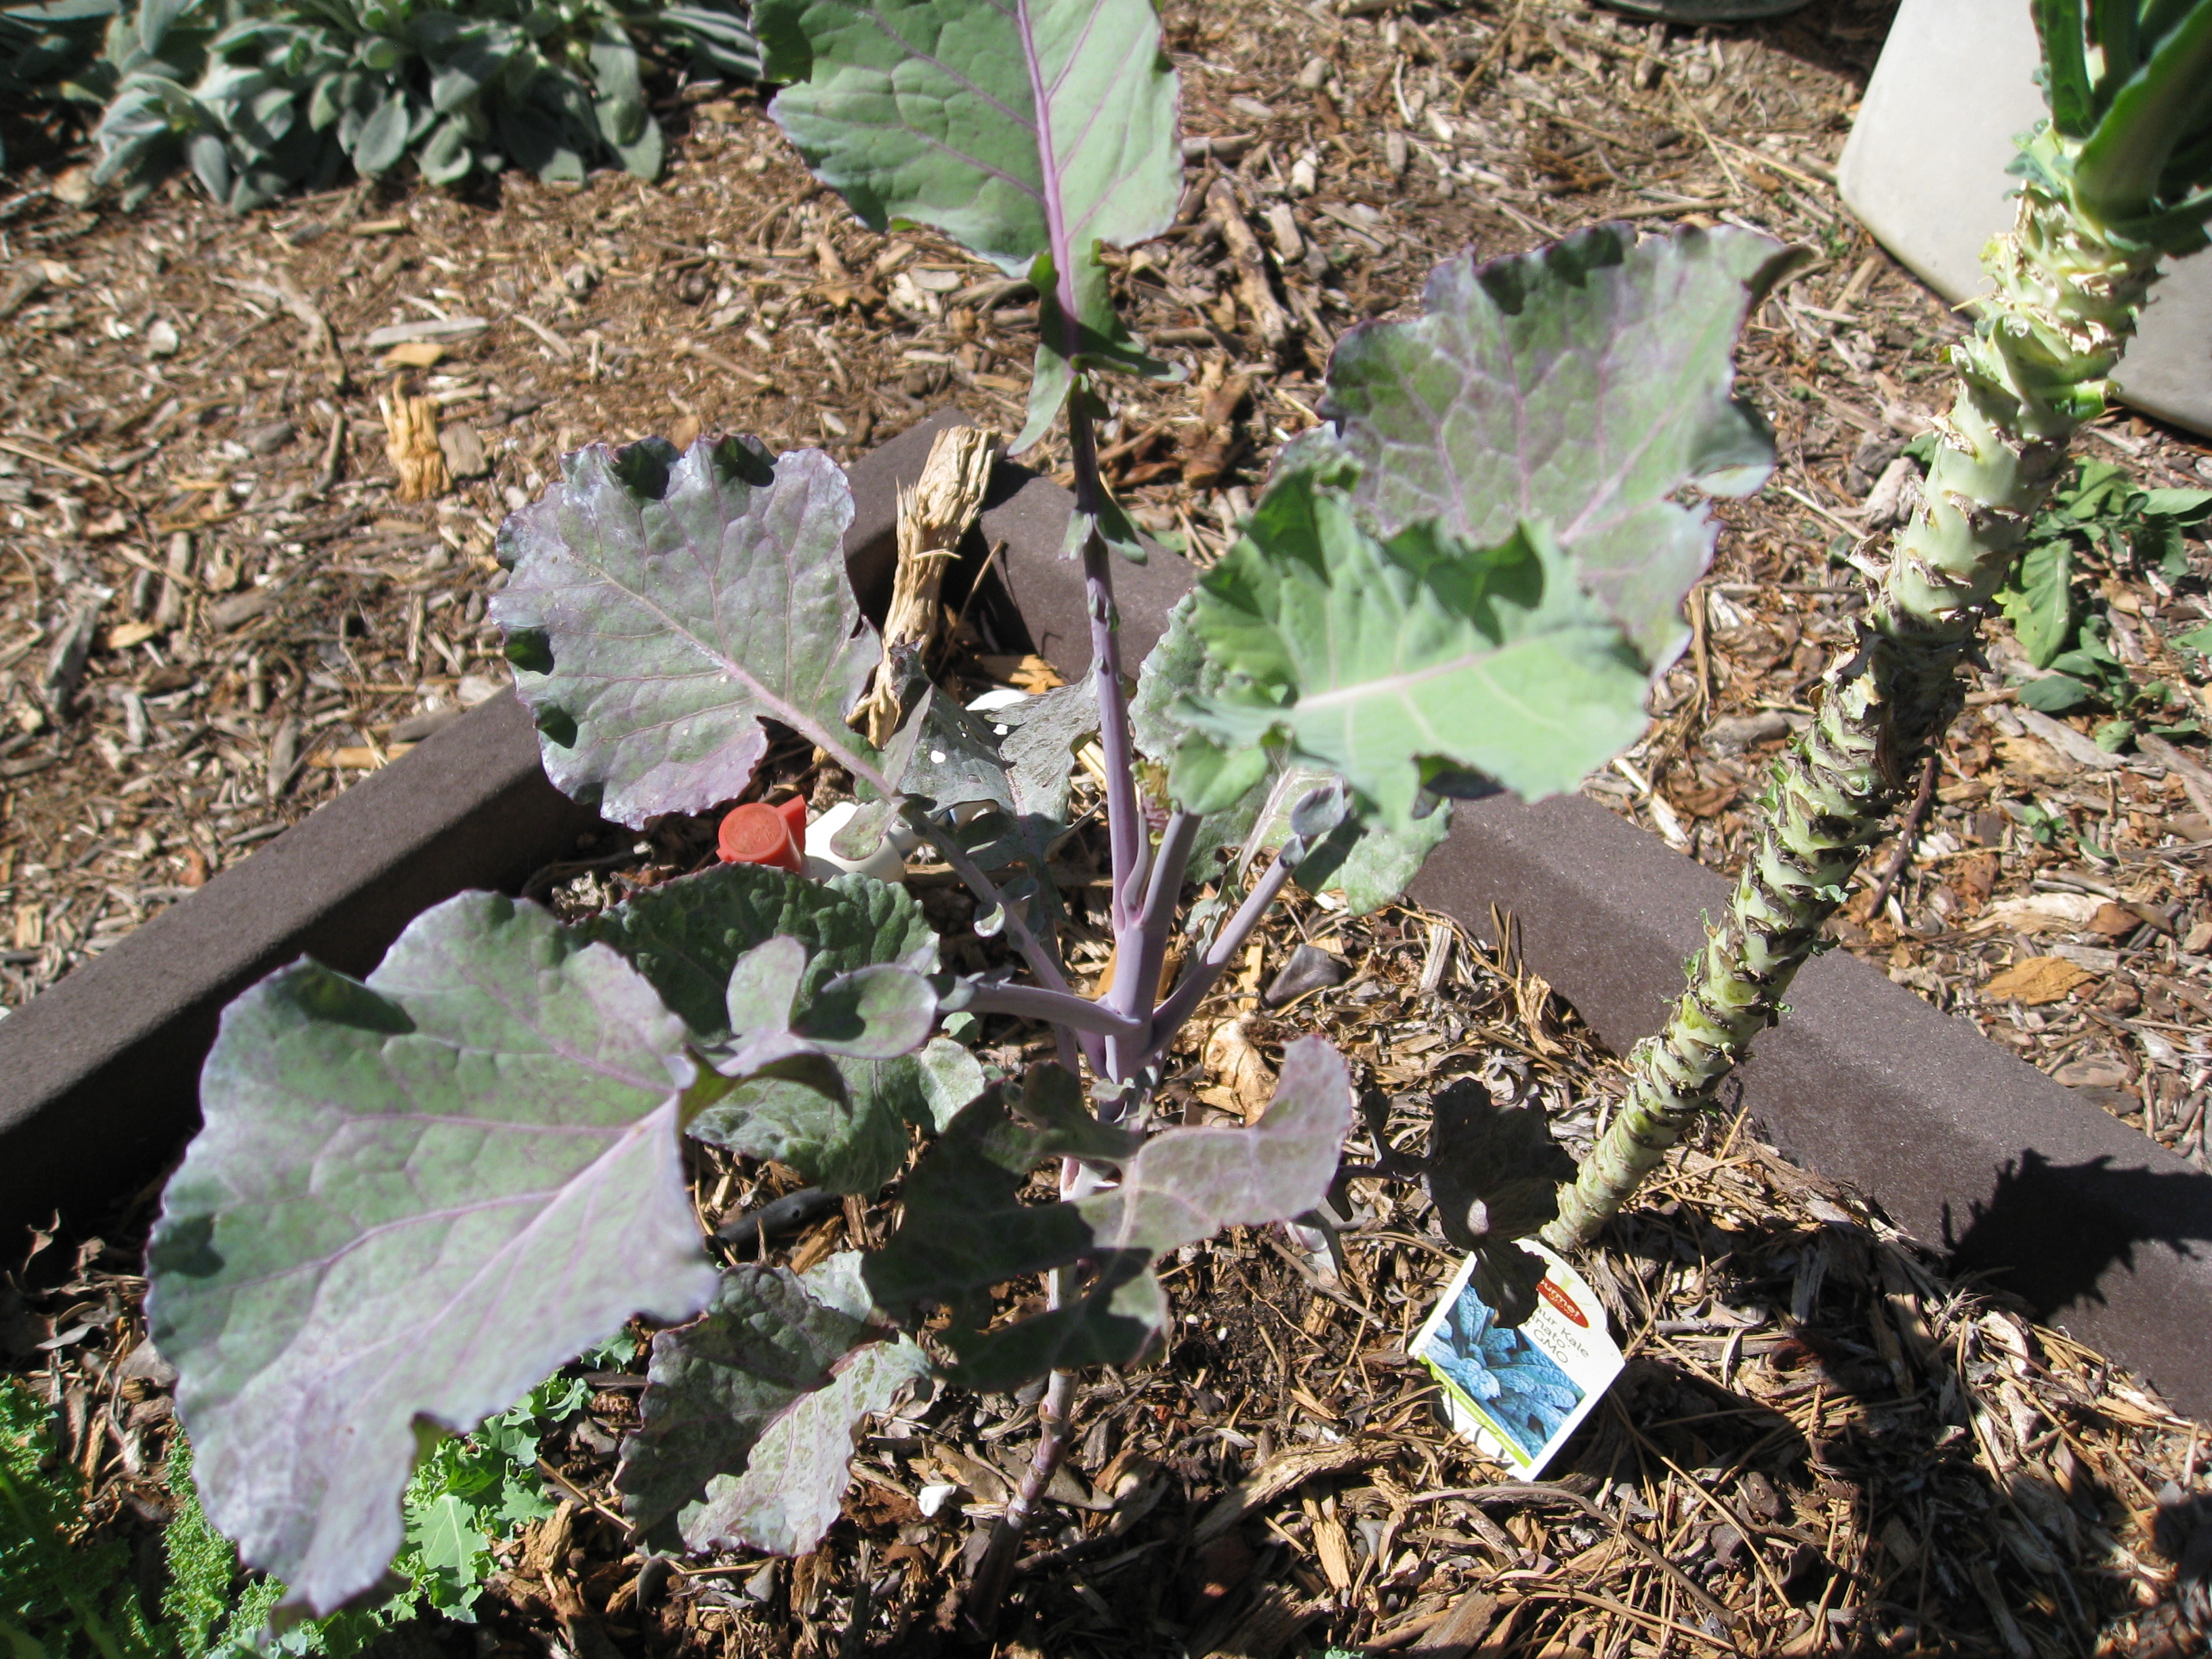 Tree kale from Bountiful Gardens, one of the wonderful perennial vegetables you can grow in your sustainable garden. 